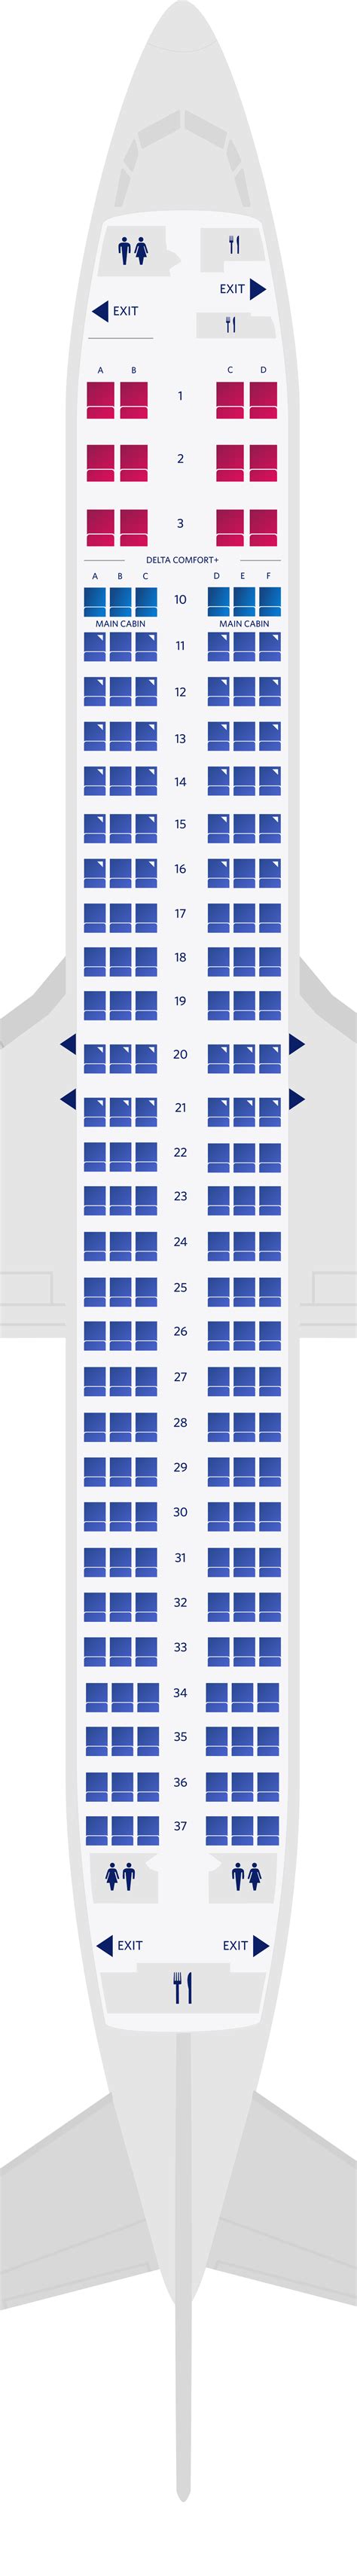 For your next SpiceJet flight, use this seating chart to get the most comfortable seats, legroom, and recline on . Seat Maps; Airlines; Cheap Flights; Comparison Charts. Short-haul Economy Class ... Planes & Seat Maps > Boeing 737-900ER (739) SpiceJet Seat Maps. Boeing 737-900ER (739) Overview; Planes & Seat Maps. Boeing 737-700 …